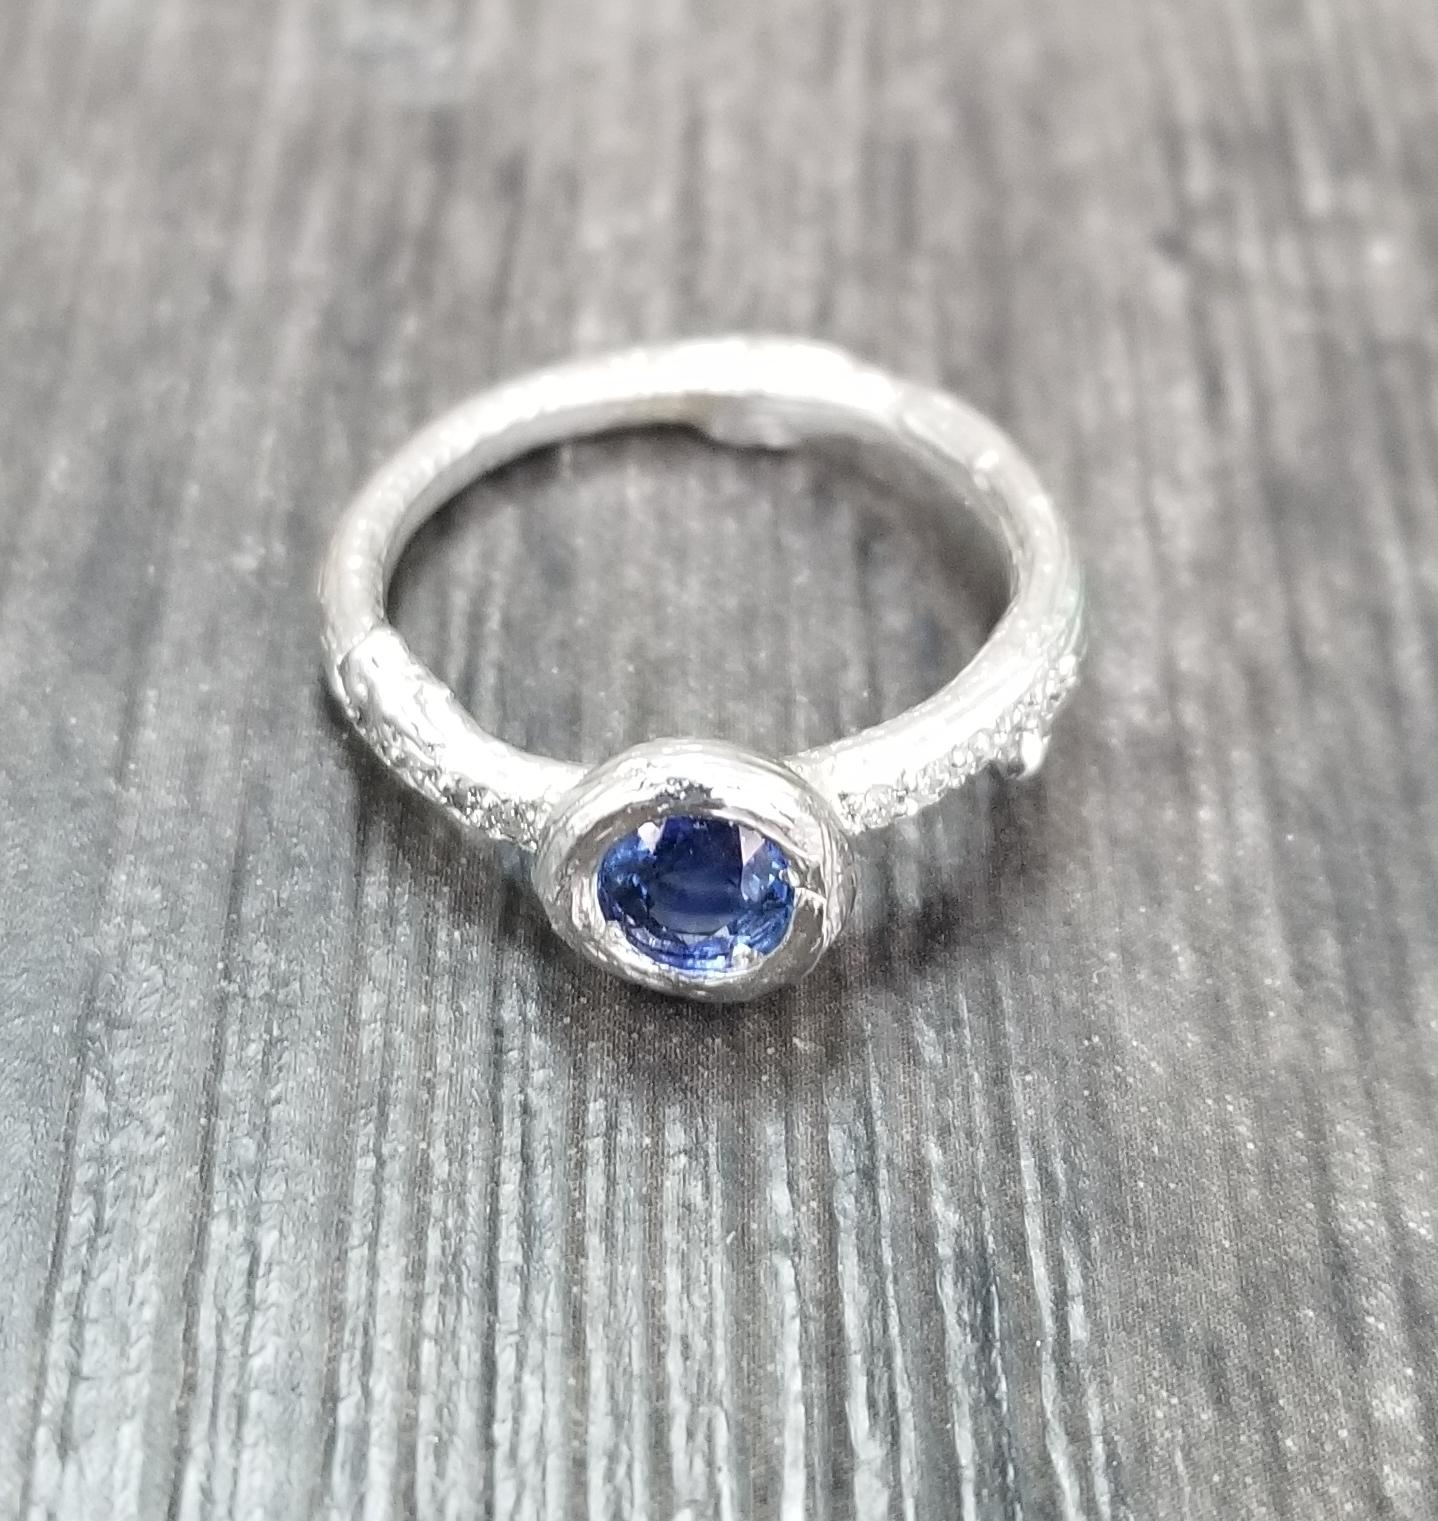 14k white gold Gresha signature bark ring with 5mm blue sapphire weighing .50pts. and 10 diamonds weighing .10pts. ring has been black rhodium.
*Available in 14k yellow, white or rose with green, yellow, orange, and pink sapphire. pick your